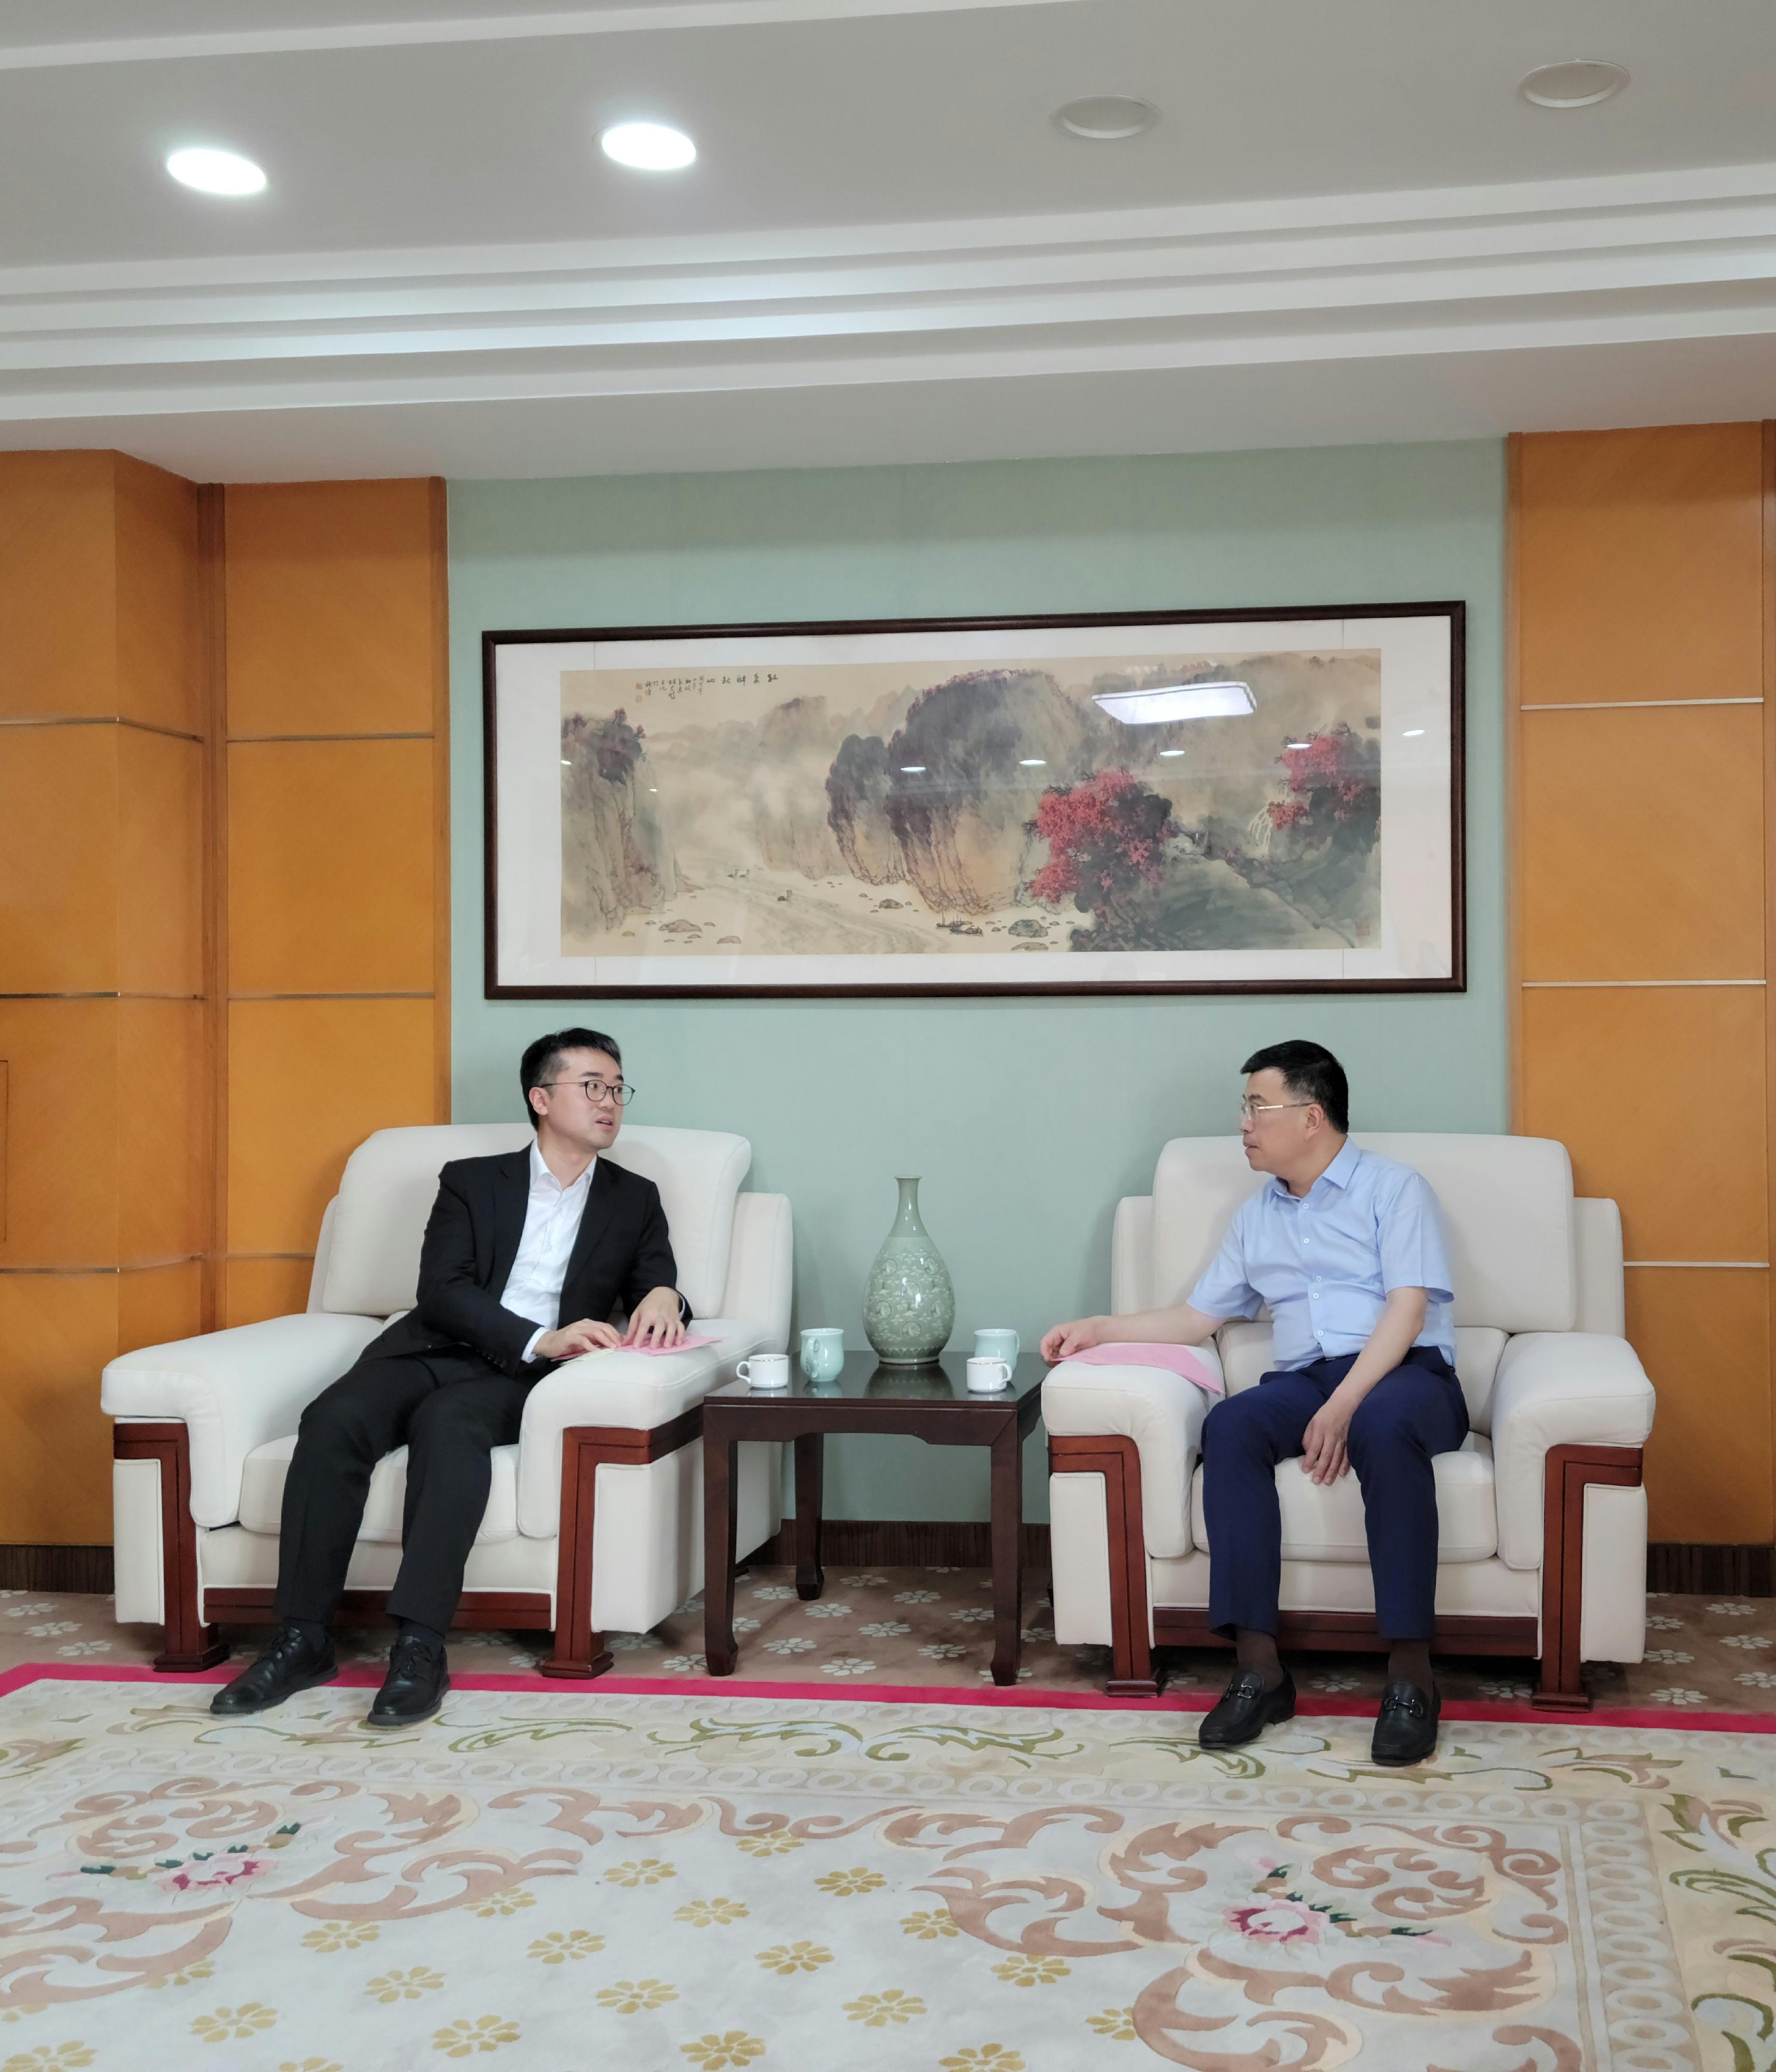 The Under Secretary for Education, Mr Sze Chun-fai (left), meets the Chief Inspector of the Department of Education of Zhejiang Province, Mr Shu Peidong (right), during his visit to Zhejiang on July 3.